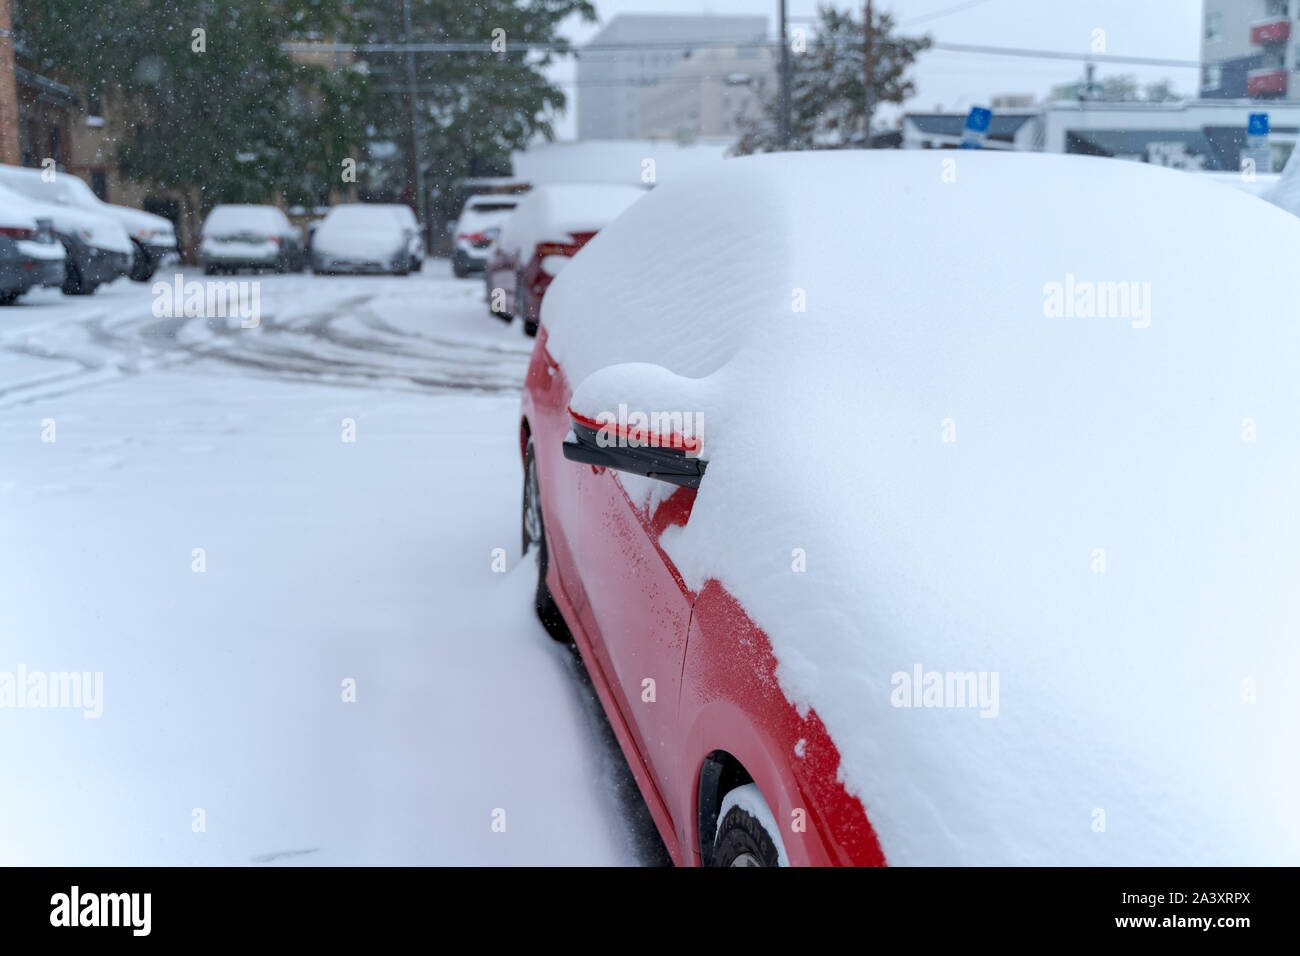 Denver, Colorado, USA- October 10, 2019: Red car covered in snow during Denver's first snow storm of the season. Stock Photo